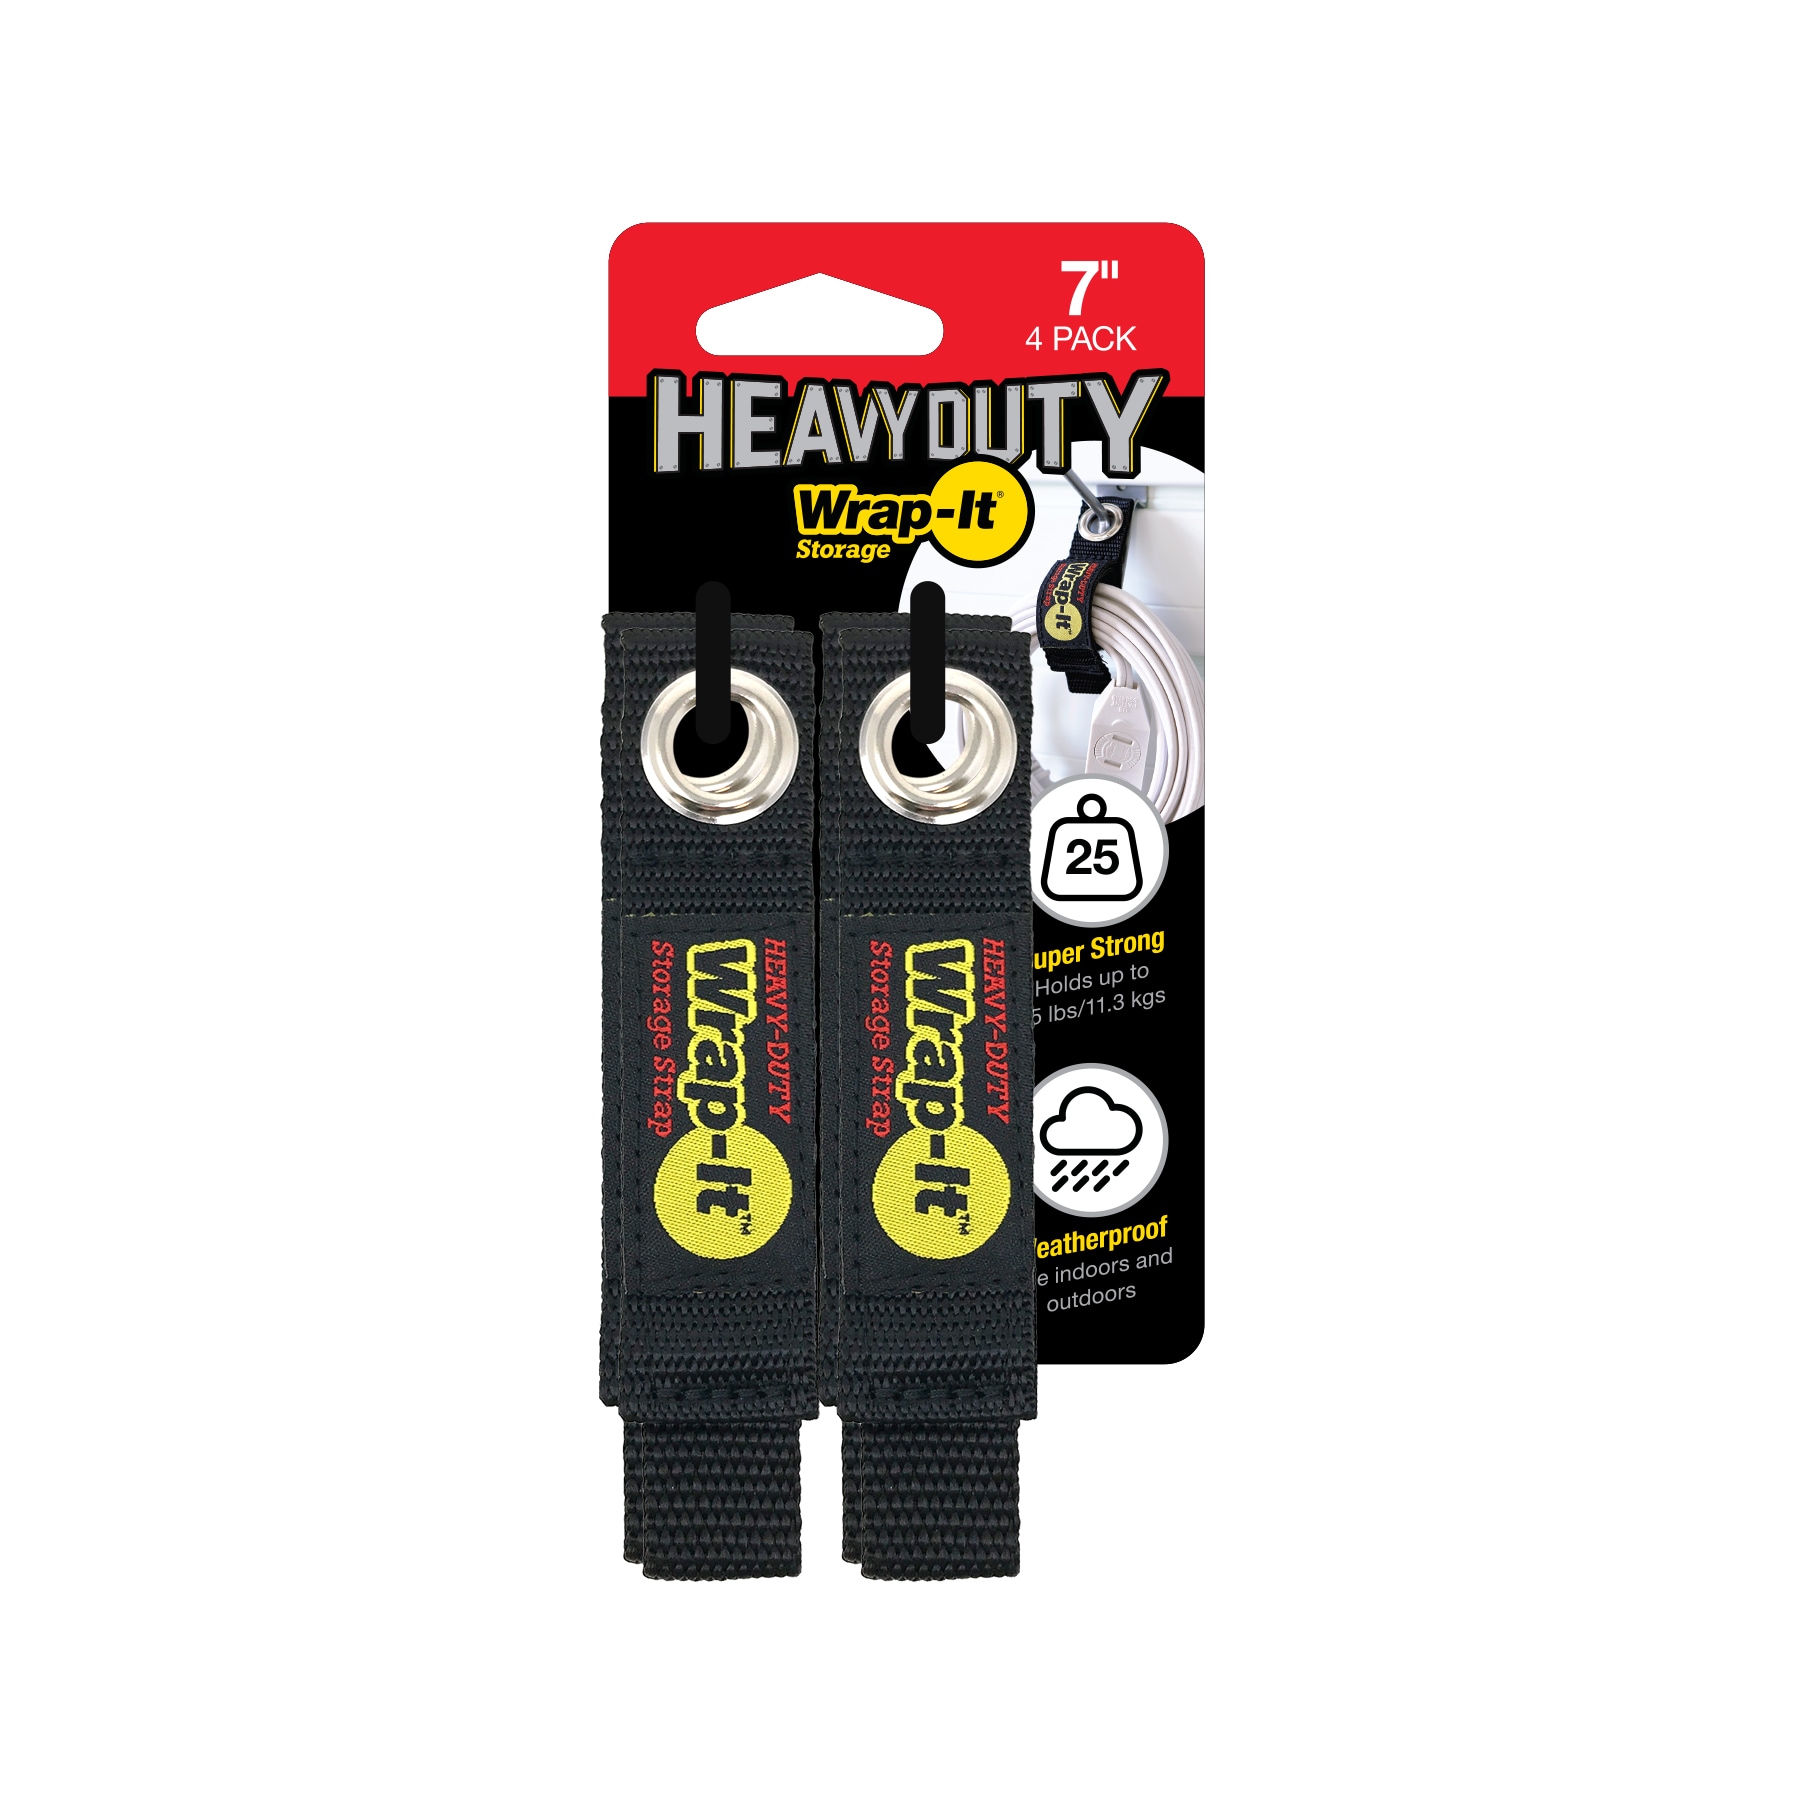 12 x 1 1/2 Inch Heavy Duty Black Cinch Strap with Eyelet - 5 Pack